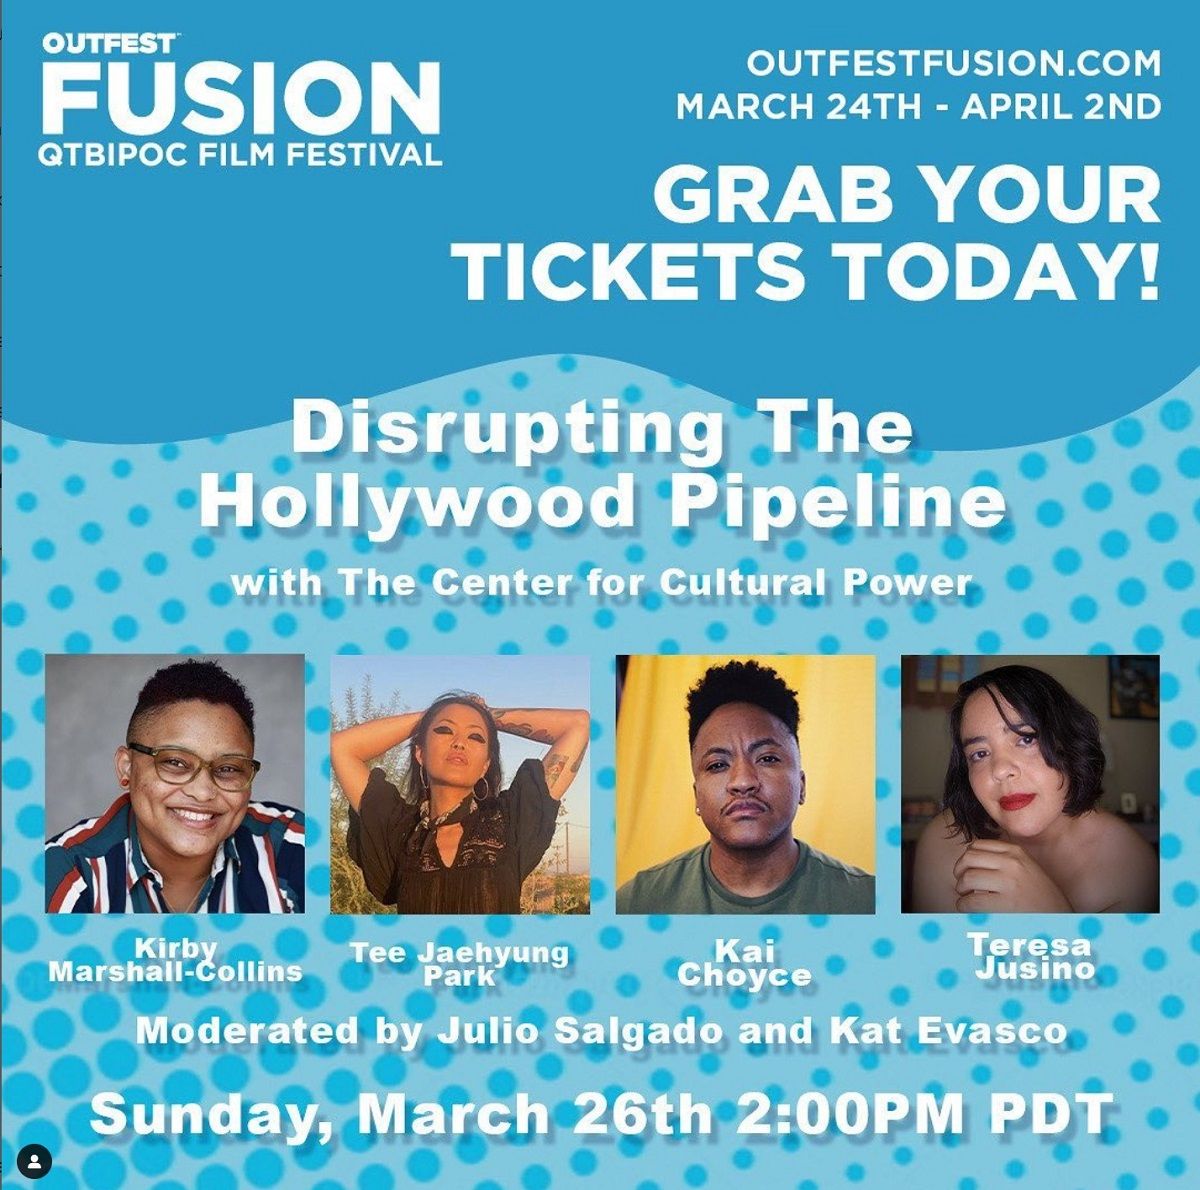 Graphic for the Disruptors Fellowship's "Disrupting the Hollywood Pipeline" panel at the Outfest Fusion QTBIPOC Film Festival. There's white text with info along with photos of the four panelists: Kirby Marshall-Collins, Tee Jaehyung Park, Kai Choyce, and Teresa Jusino against an aquamarine patterned background. The info text reads from top to bottom: "outfestfusion.com March 24th-April 2nd Grab your tickets today! Disrupting the Hollywood Pipeline with the Center for Cultural Power. Moderated by Julio Salgado and Kat Evasco. Sunday, March 26th 2:00PM PDT."